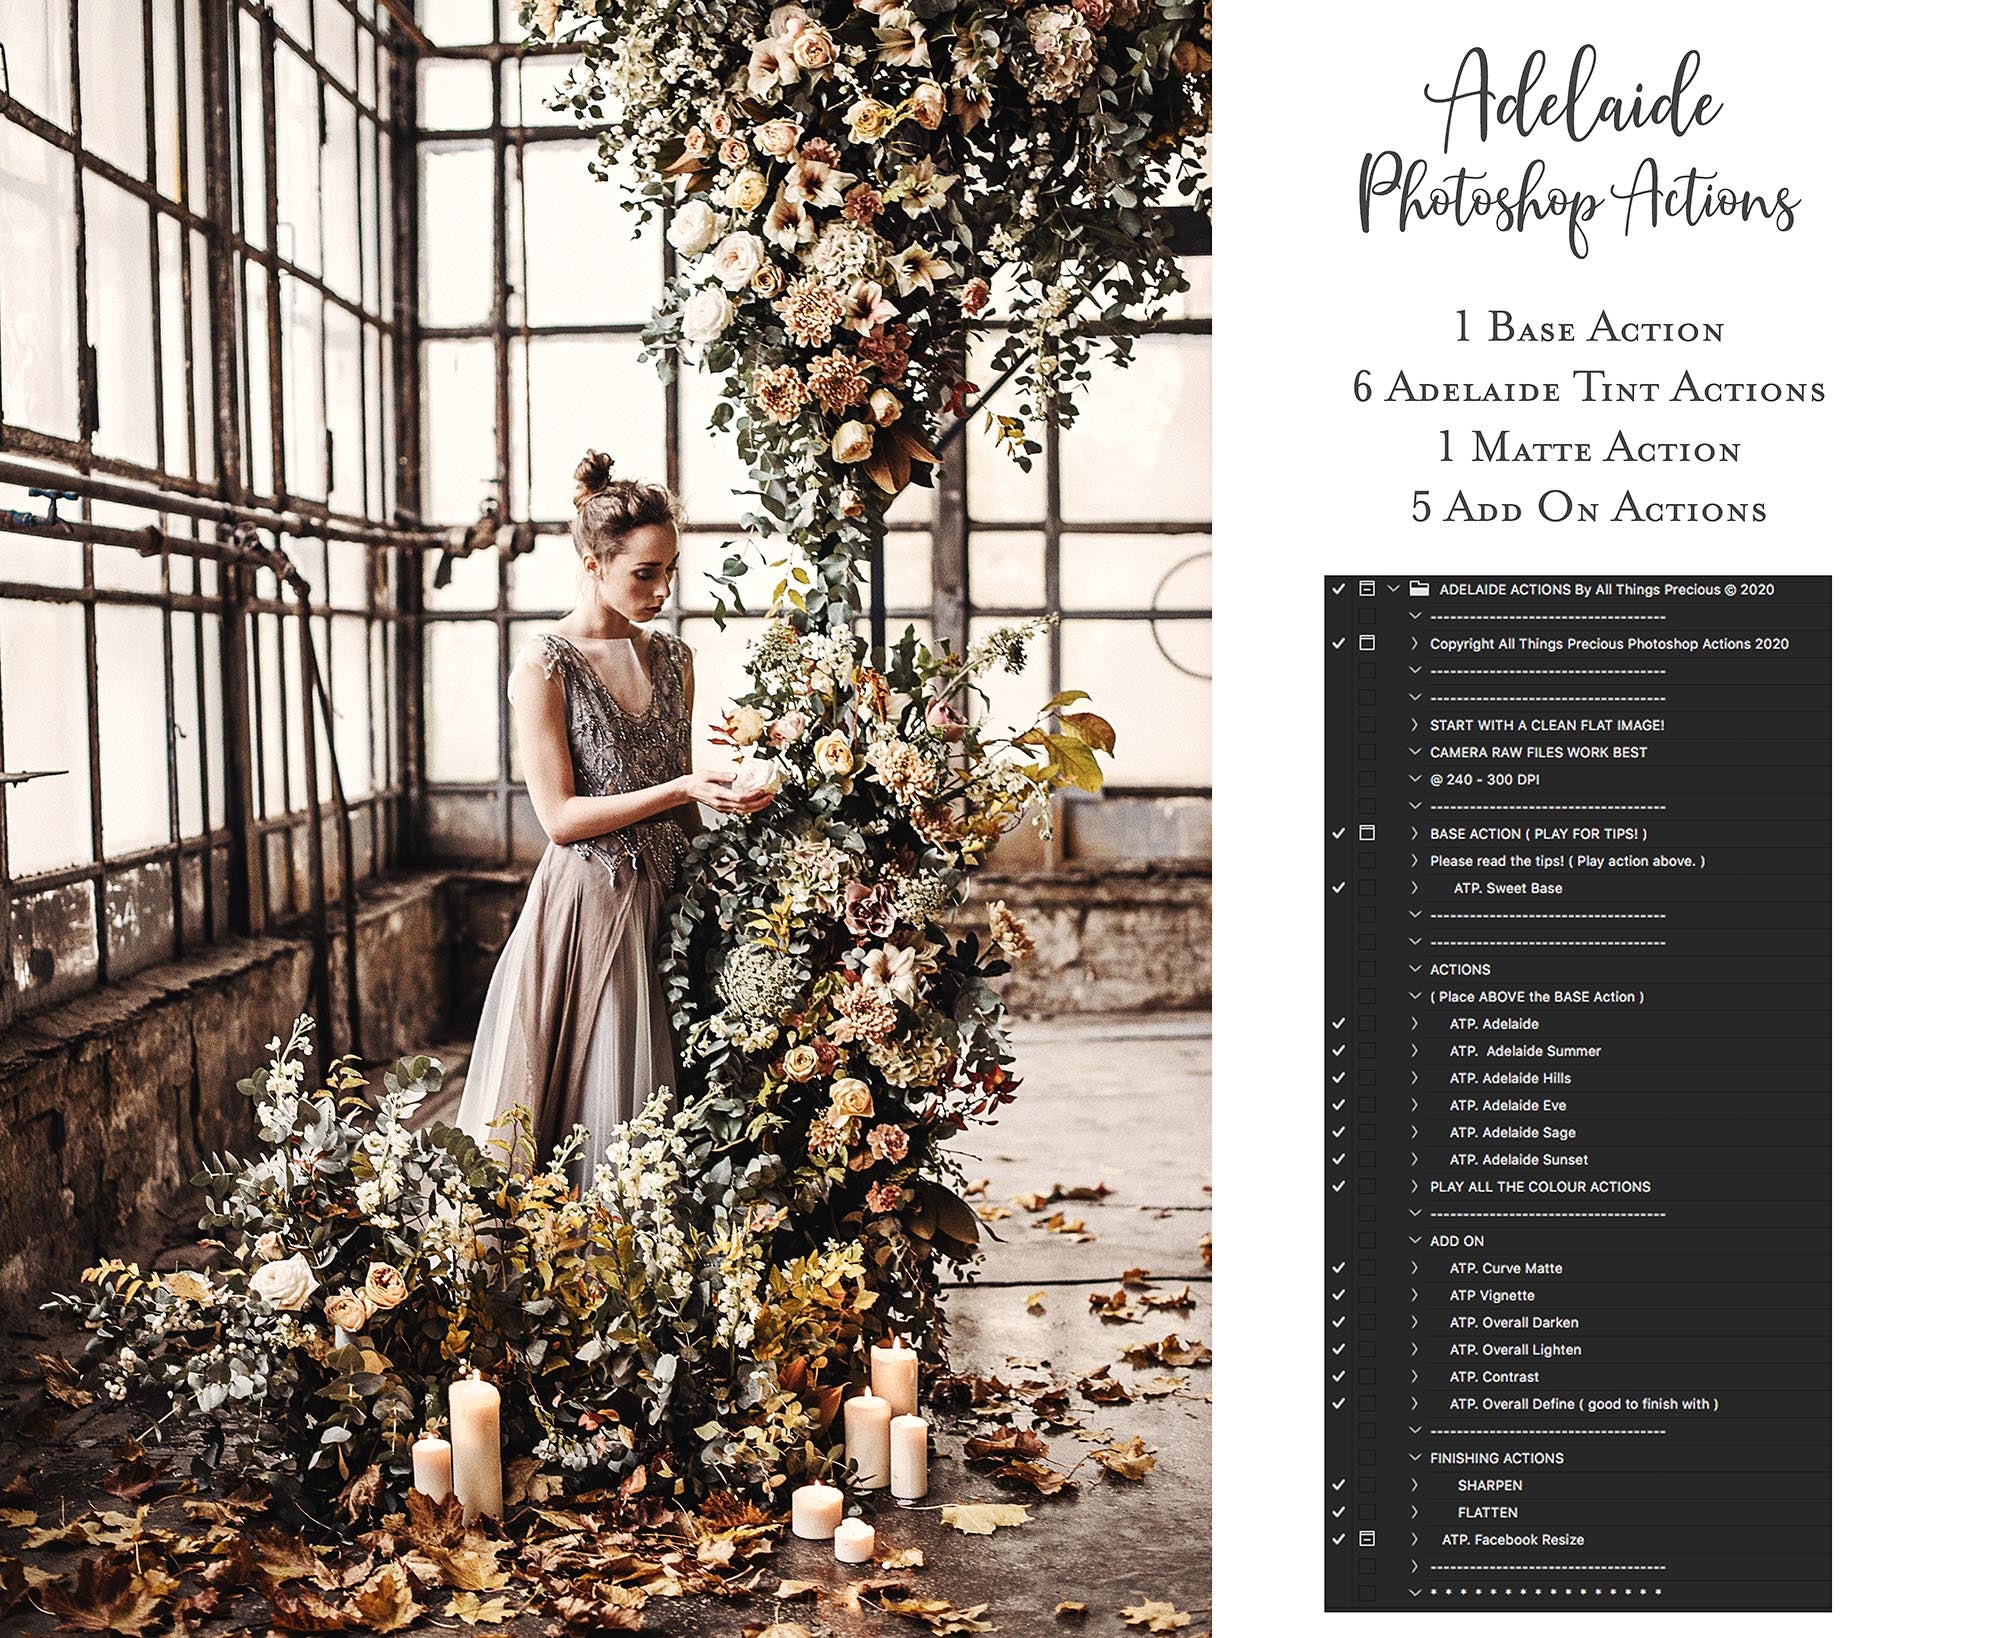 Photoshop Actions for Photography Edits. PS atn files are compatible with all versions of photoshop above CS6. Photoshop Actions for professional photographers, photo edits and Instagram influencers. Warm, Rich, light, Matte. For Wedding, Newborn, Studio Photography. By ATP Textures